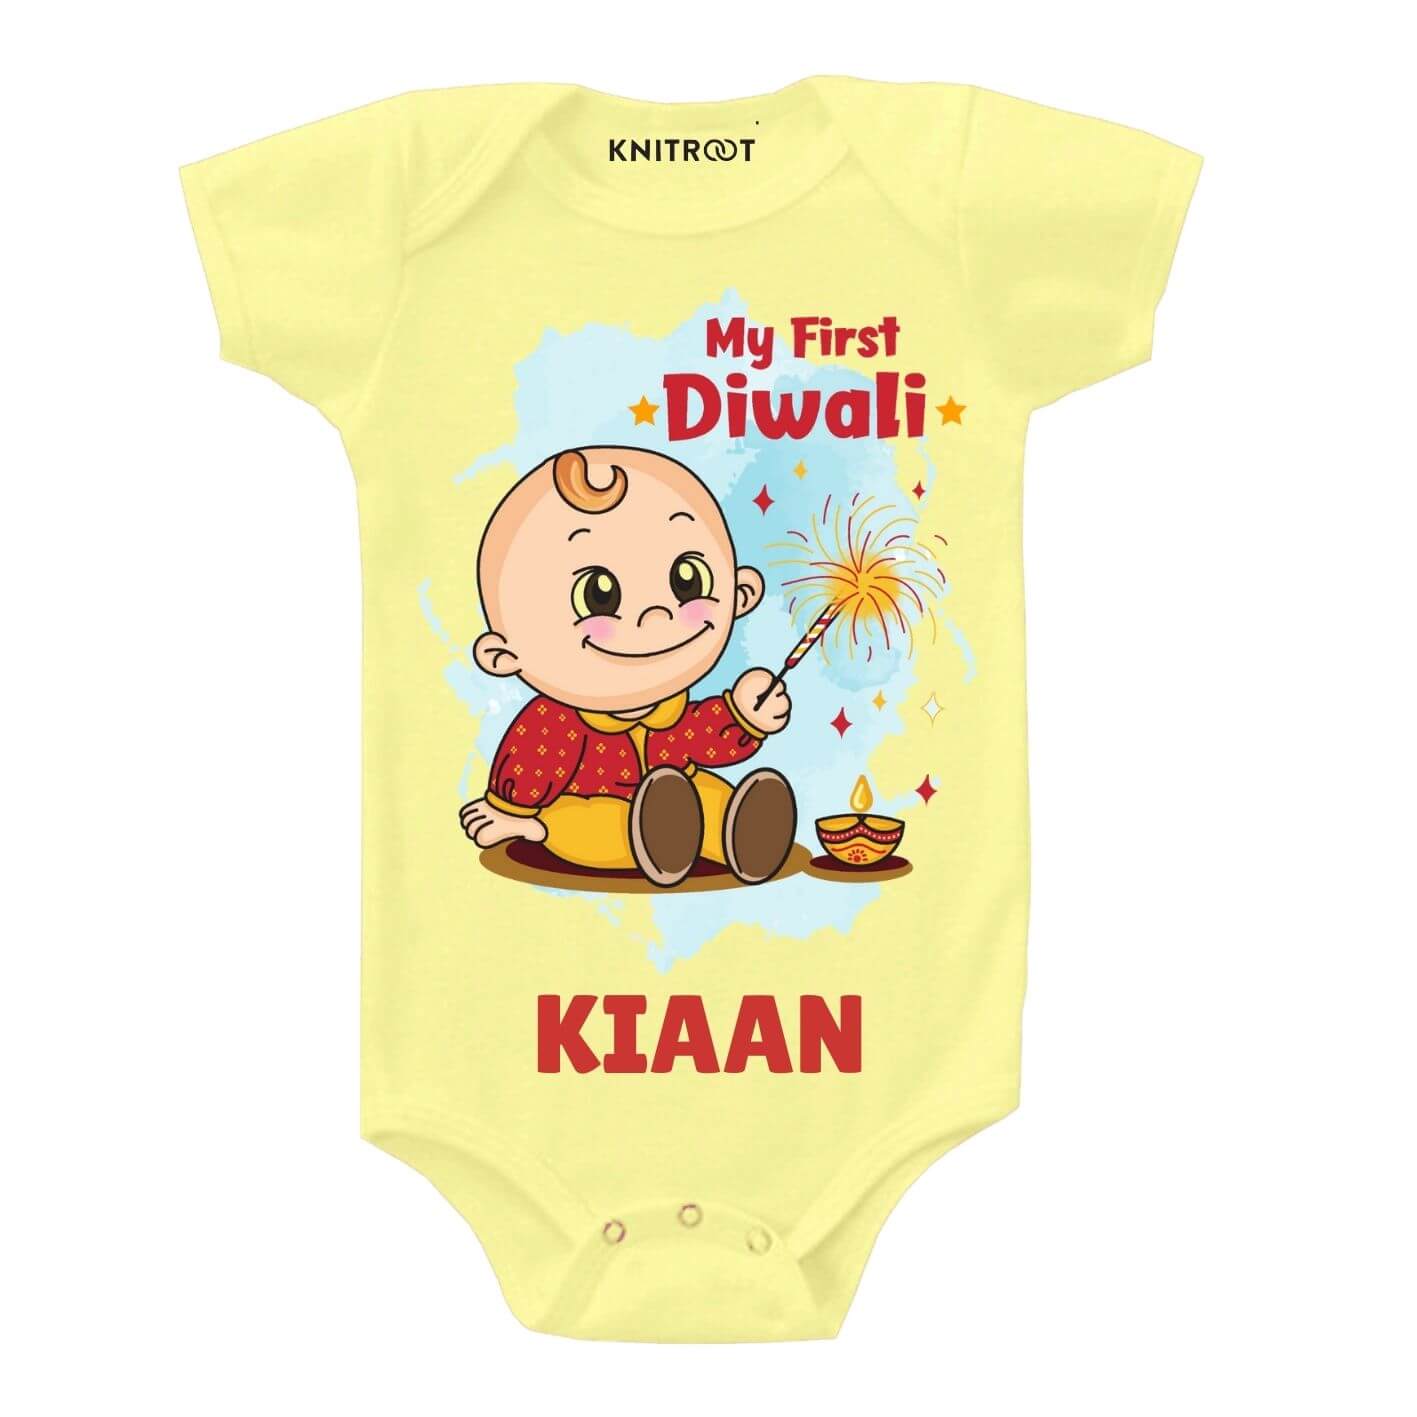 Trending Styles to Dress up Your Kid This Diwal